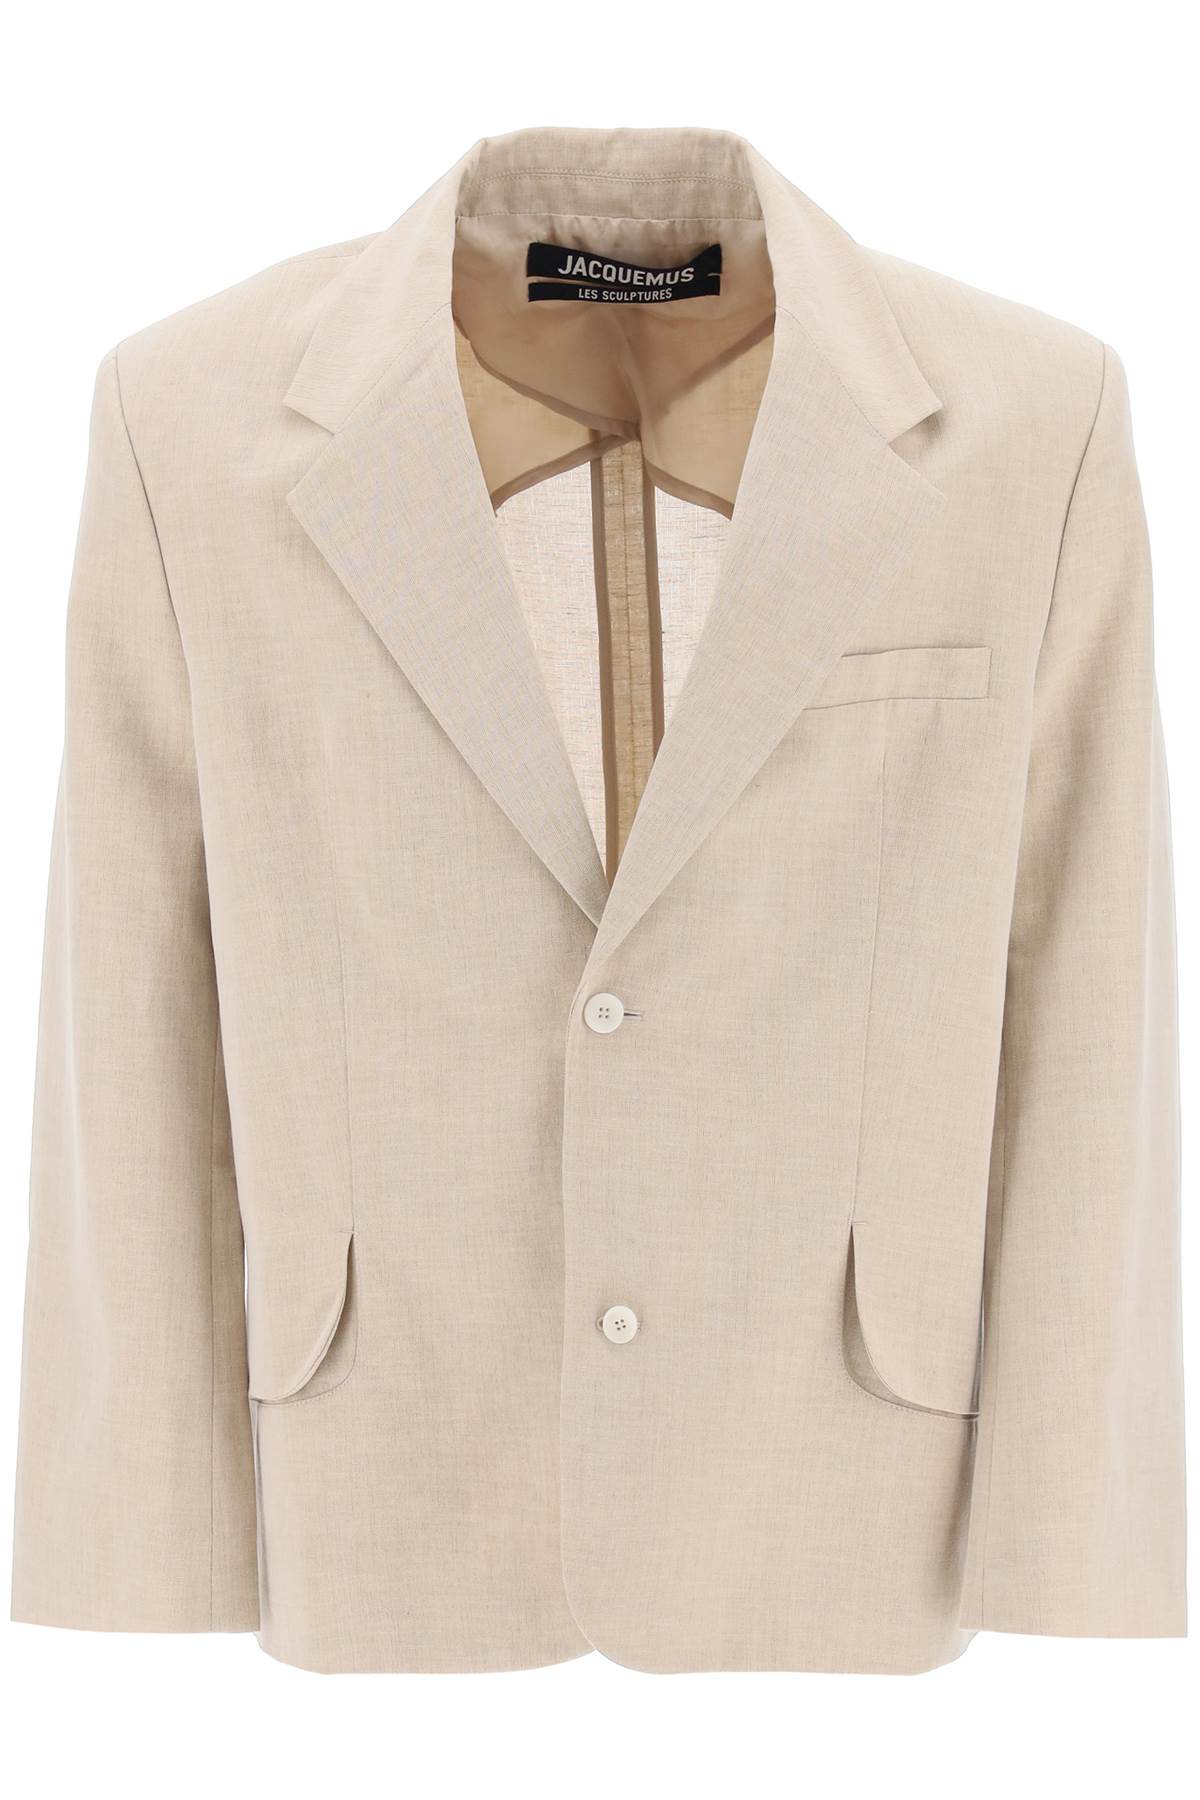 Shop Jacquemus "single-breasted Jacket Titled The In Beige